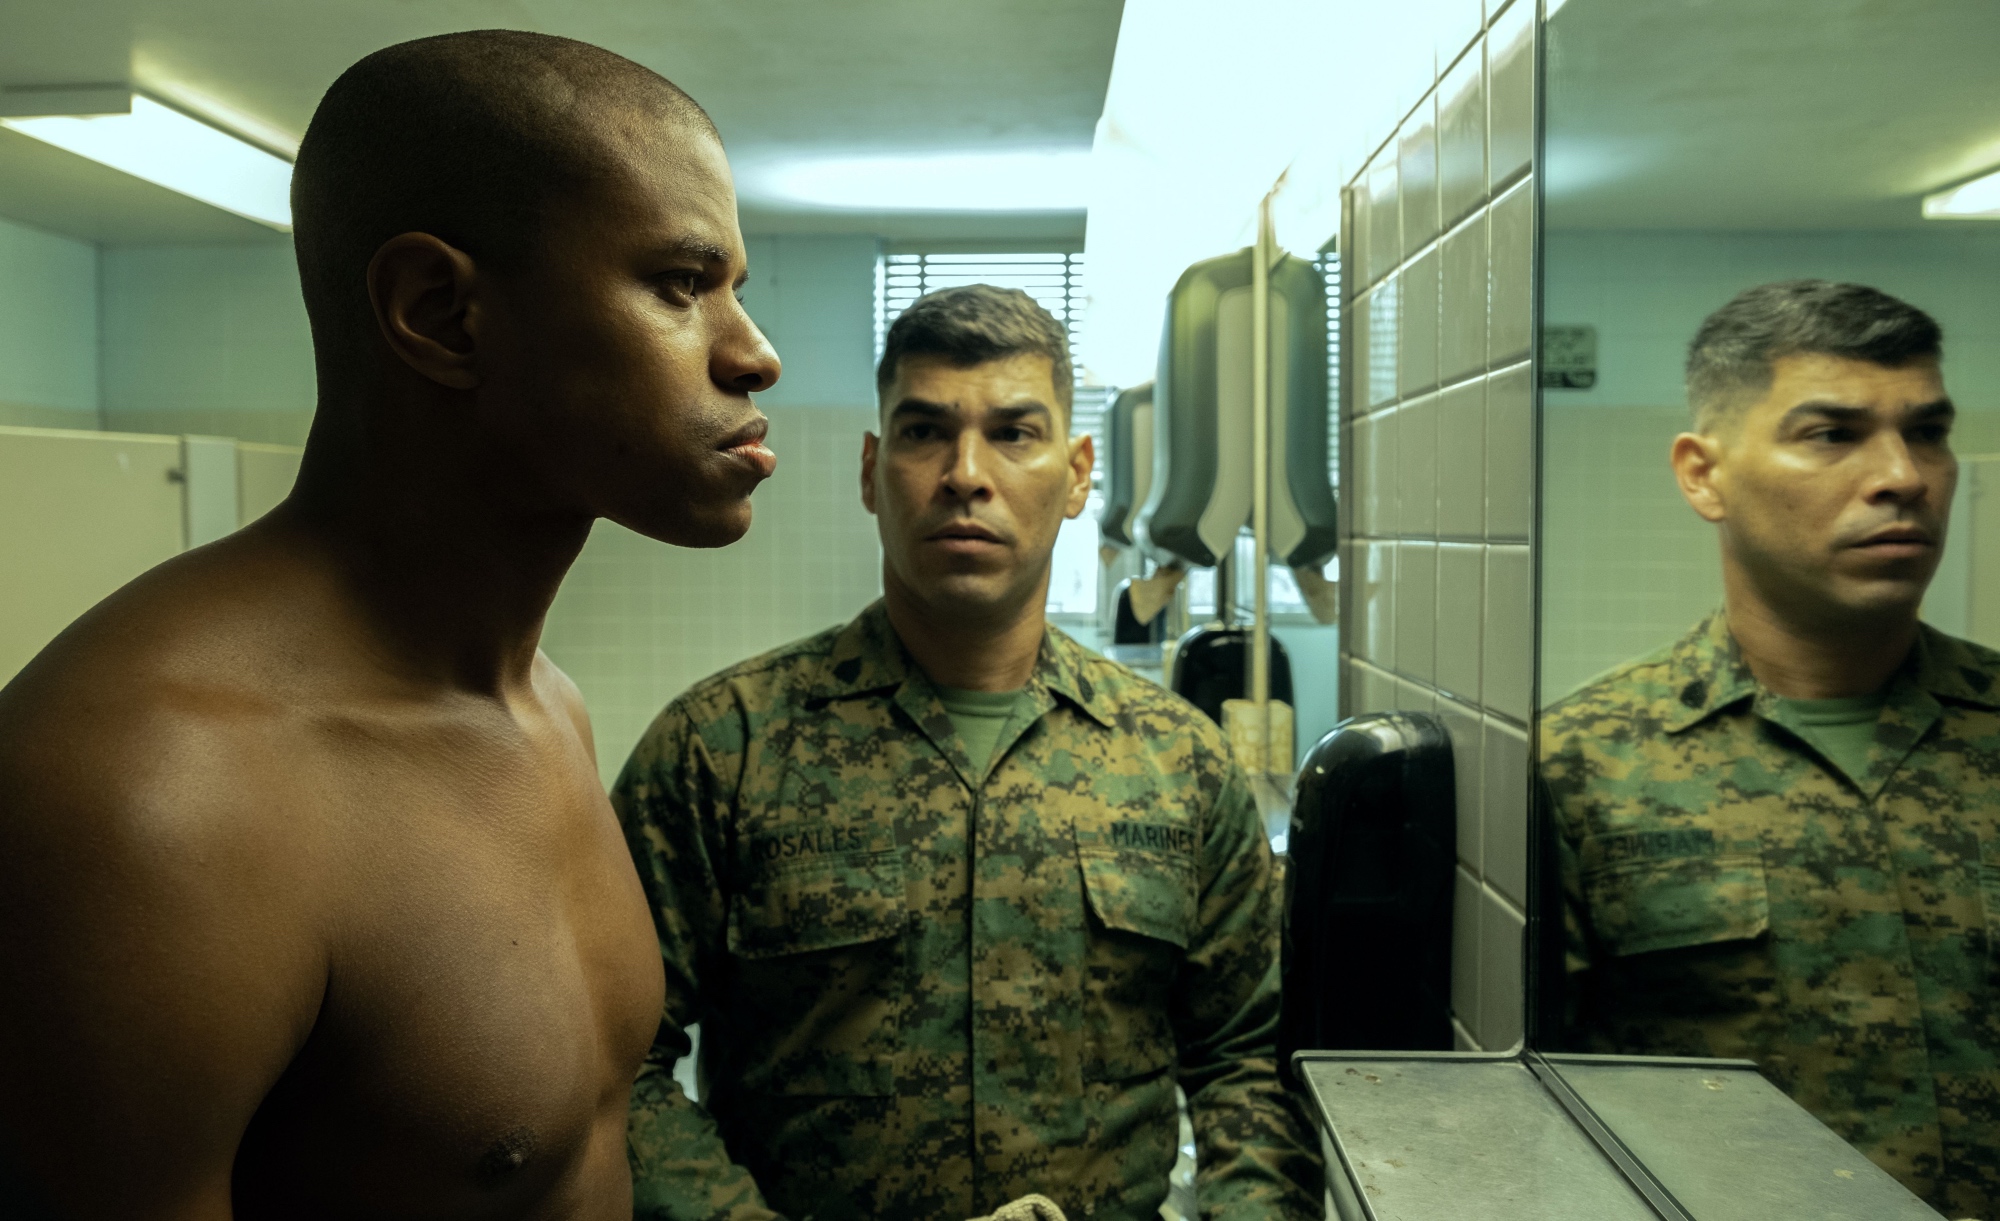 'The Inspection' Jeremy Pope as Ellis French and Raúl Castillo as Rosales. Pope is shirtless looking at himself in the mirror. Castillo is wearing his Marine uniform and looking at him from the side.